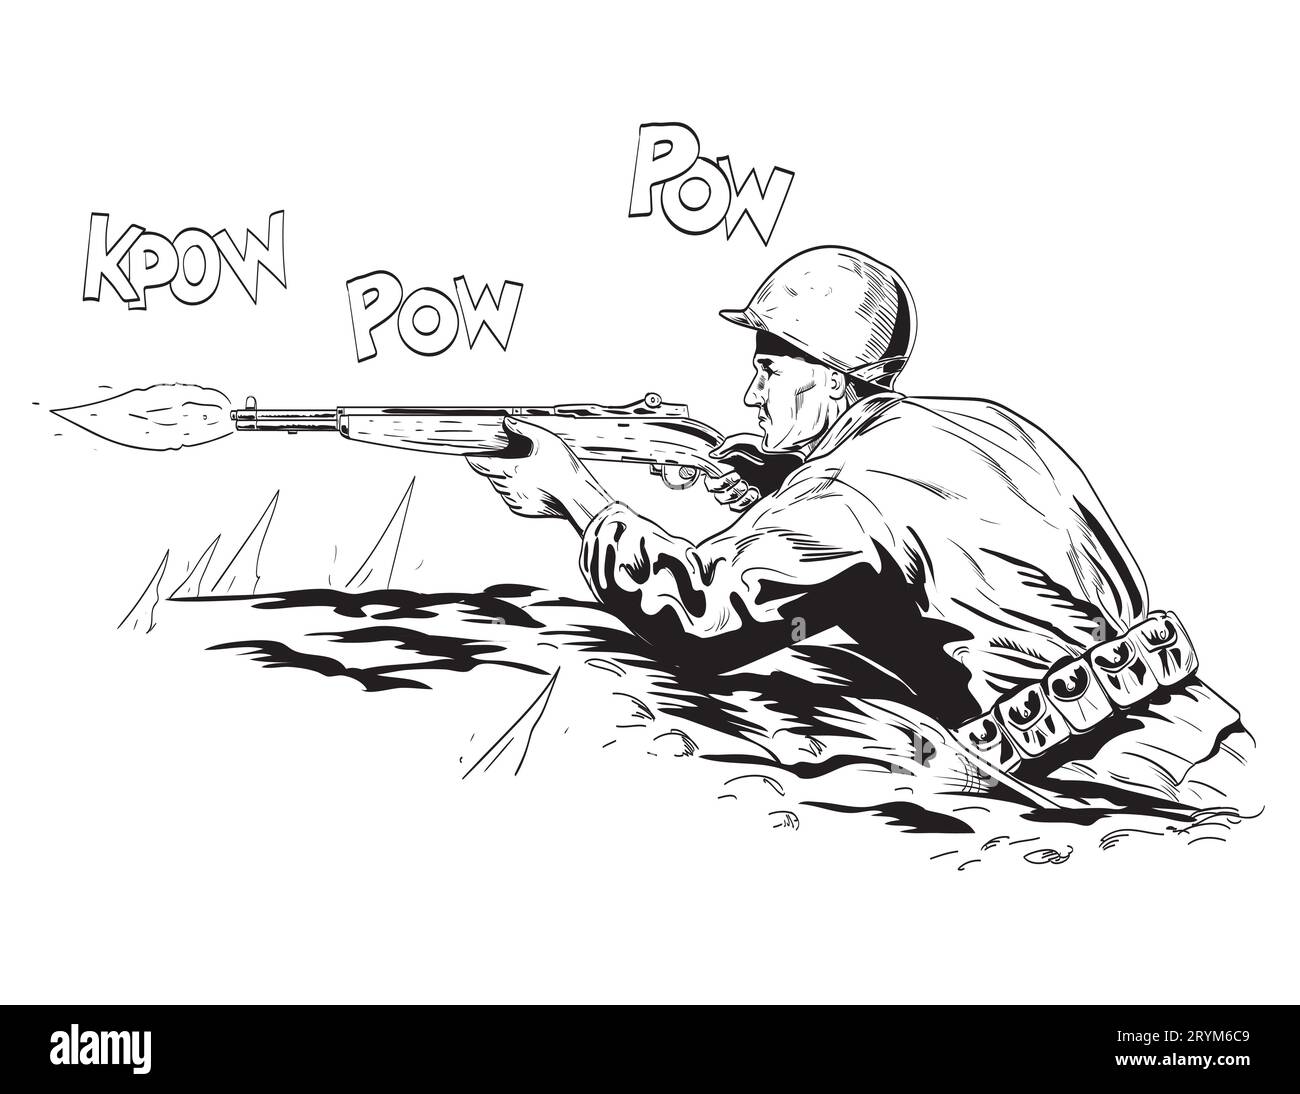 World War Two American Gi Soldier Aiming Firing Rifle in Foxhole Side View Comics Style Drawing Stock Photo